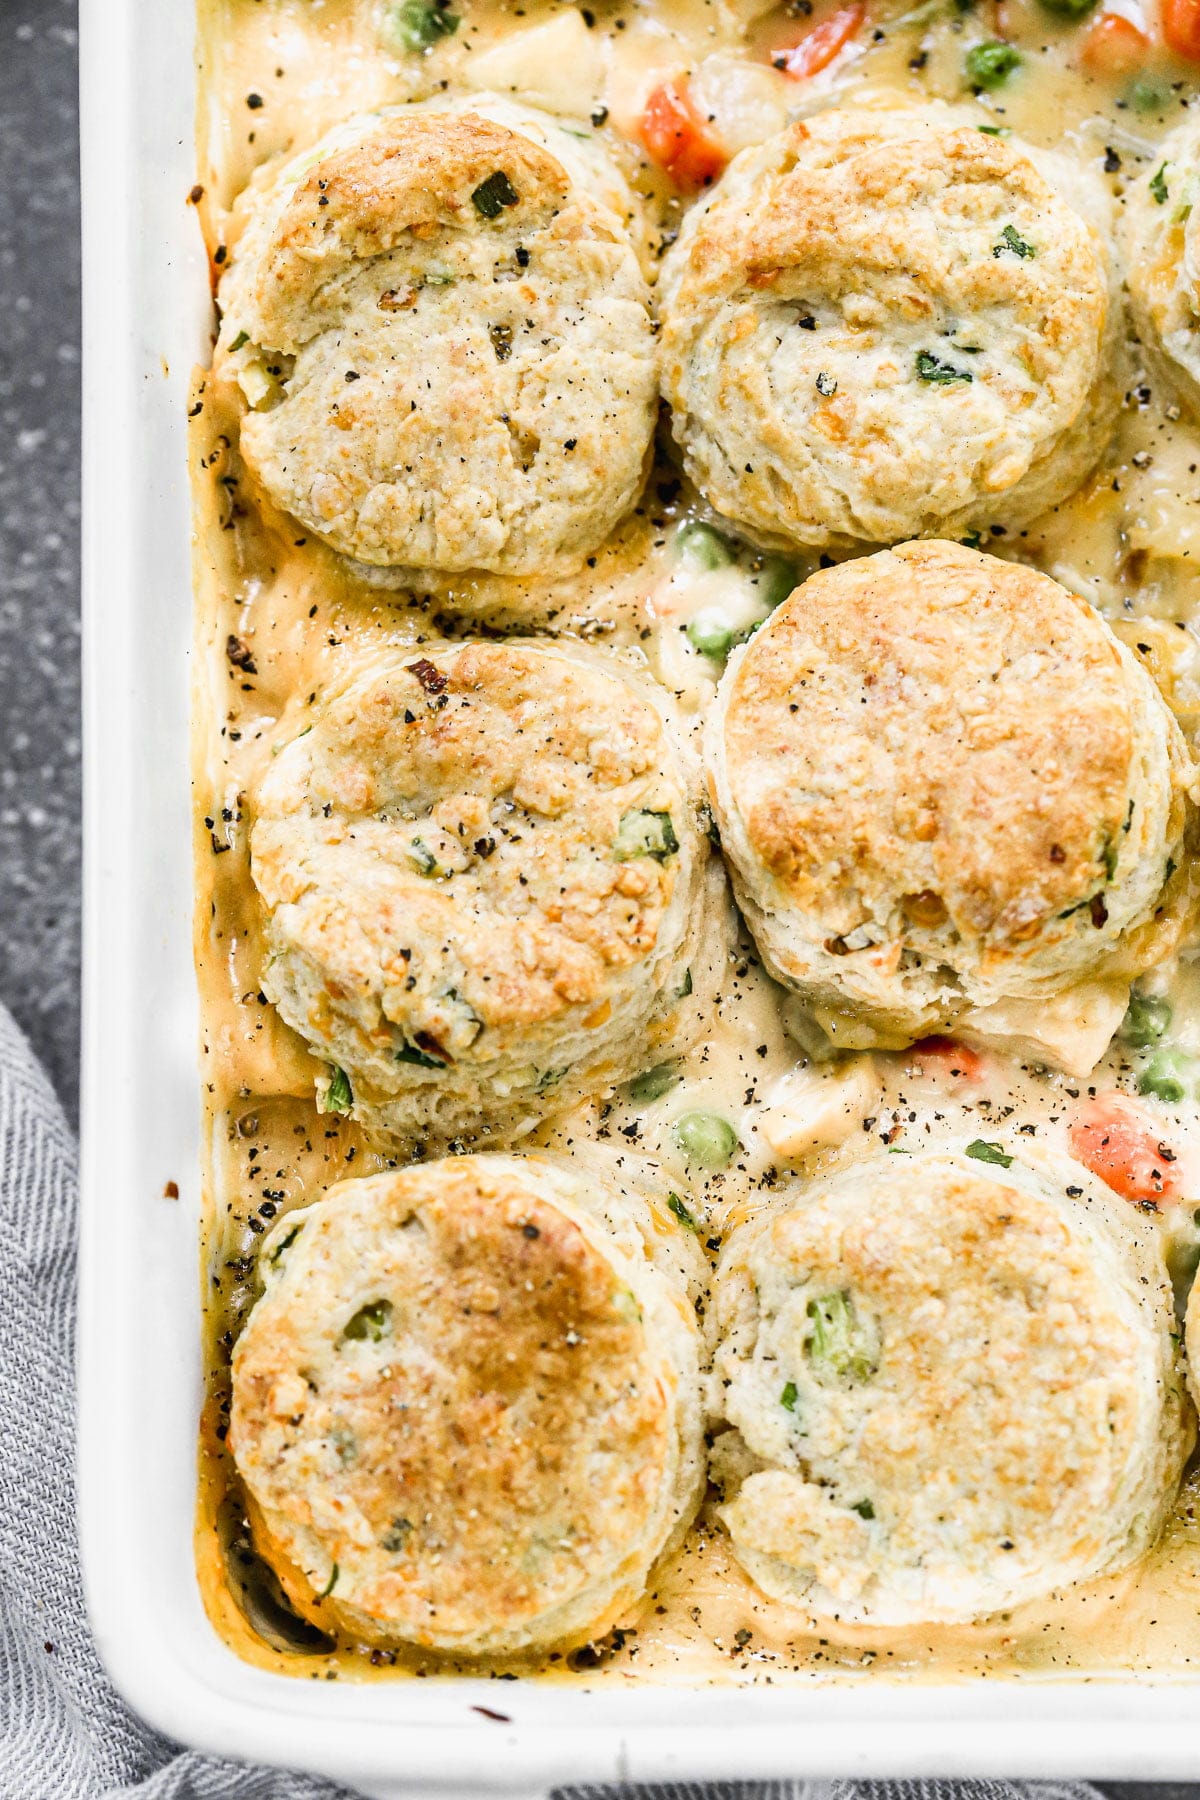 Possibly our&nbsp;favorite comfort food of fall, this&nbsp;Chicken Pot Pie with Biscuits is cozy, delicious and a such fun twist on traditional chicken pot pie. We take a classic creamy pot pie filling full of chicken, carrots, celery, and potatoes and stud it with sharp cheddar cheese and then&nbsp;top it off with fluffy, tender cheddar chive biscuits. Heaven in a casserole dish.